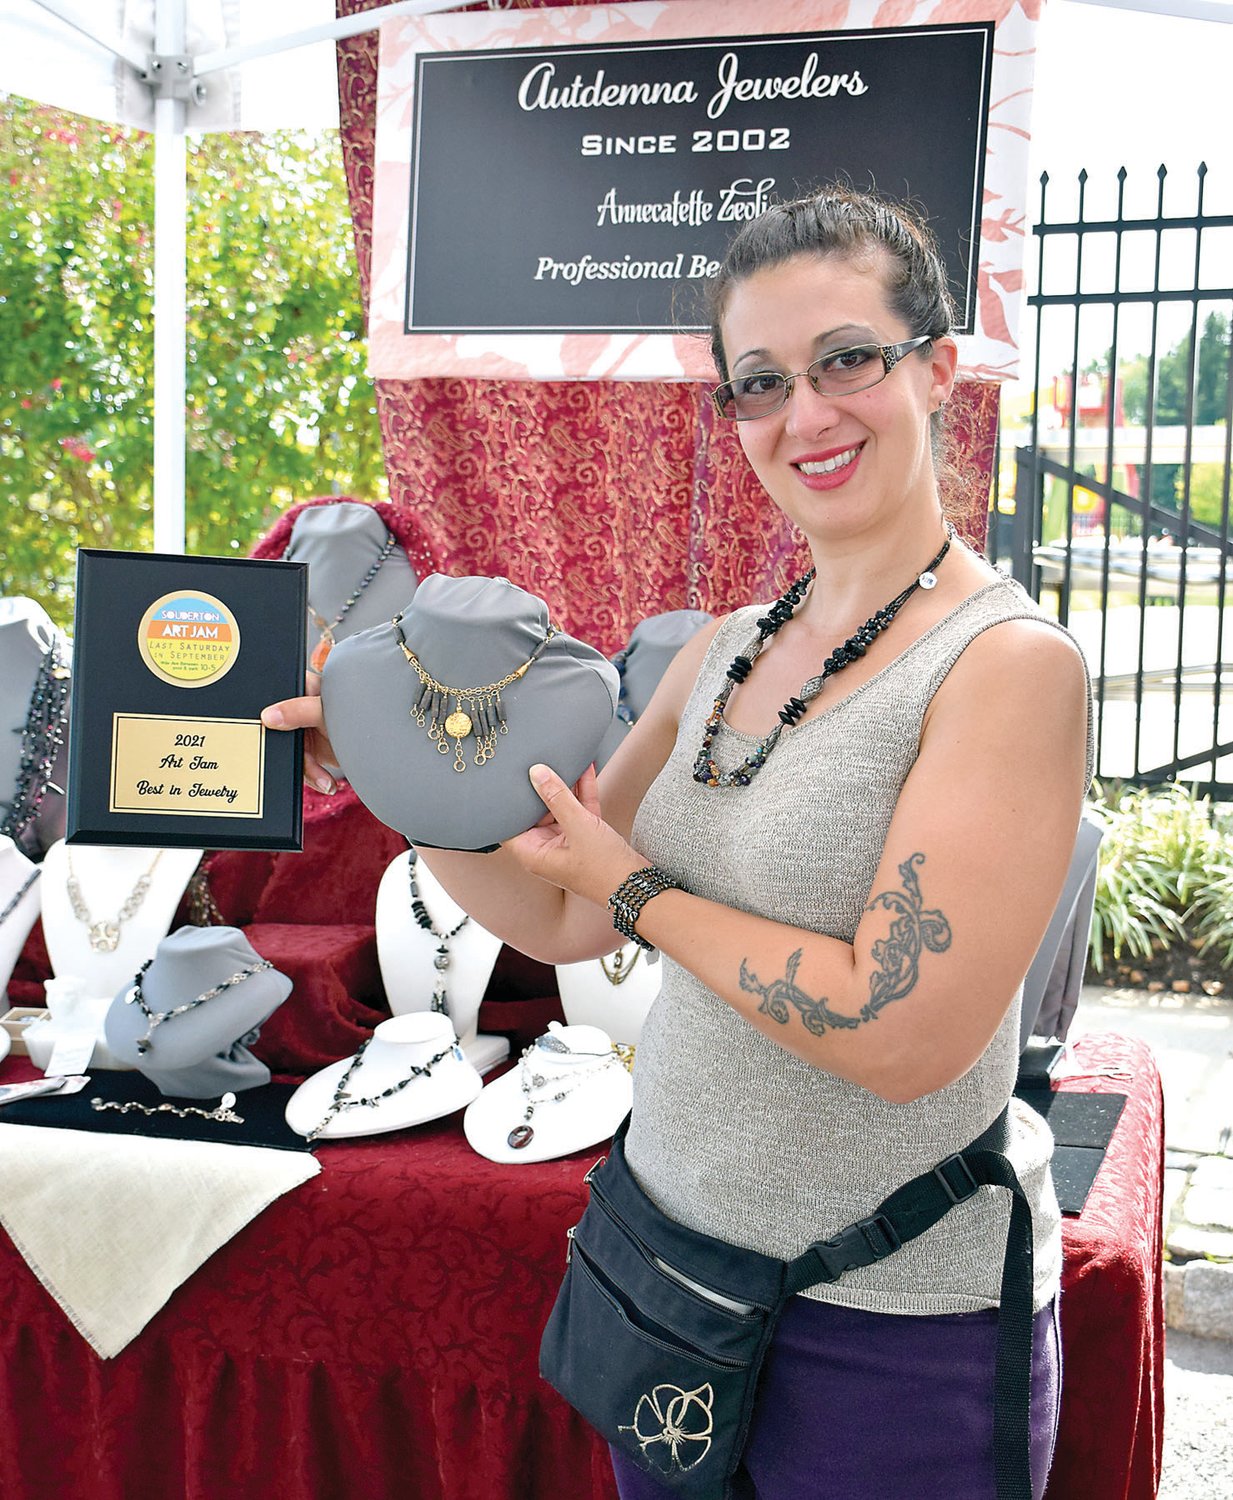 Bead artist Annecatette Khallouf of Autdemna Jewelers received the Best in Jewelry award.